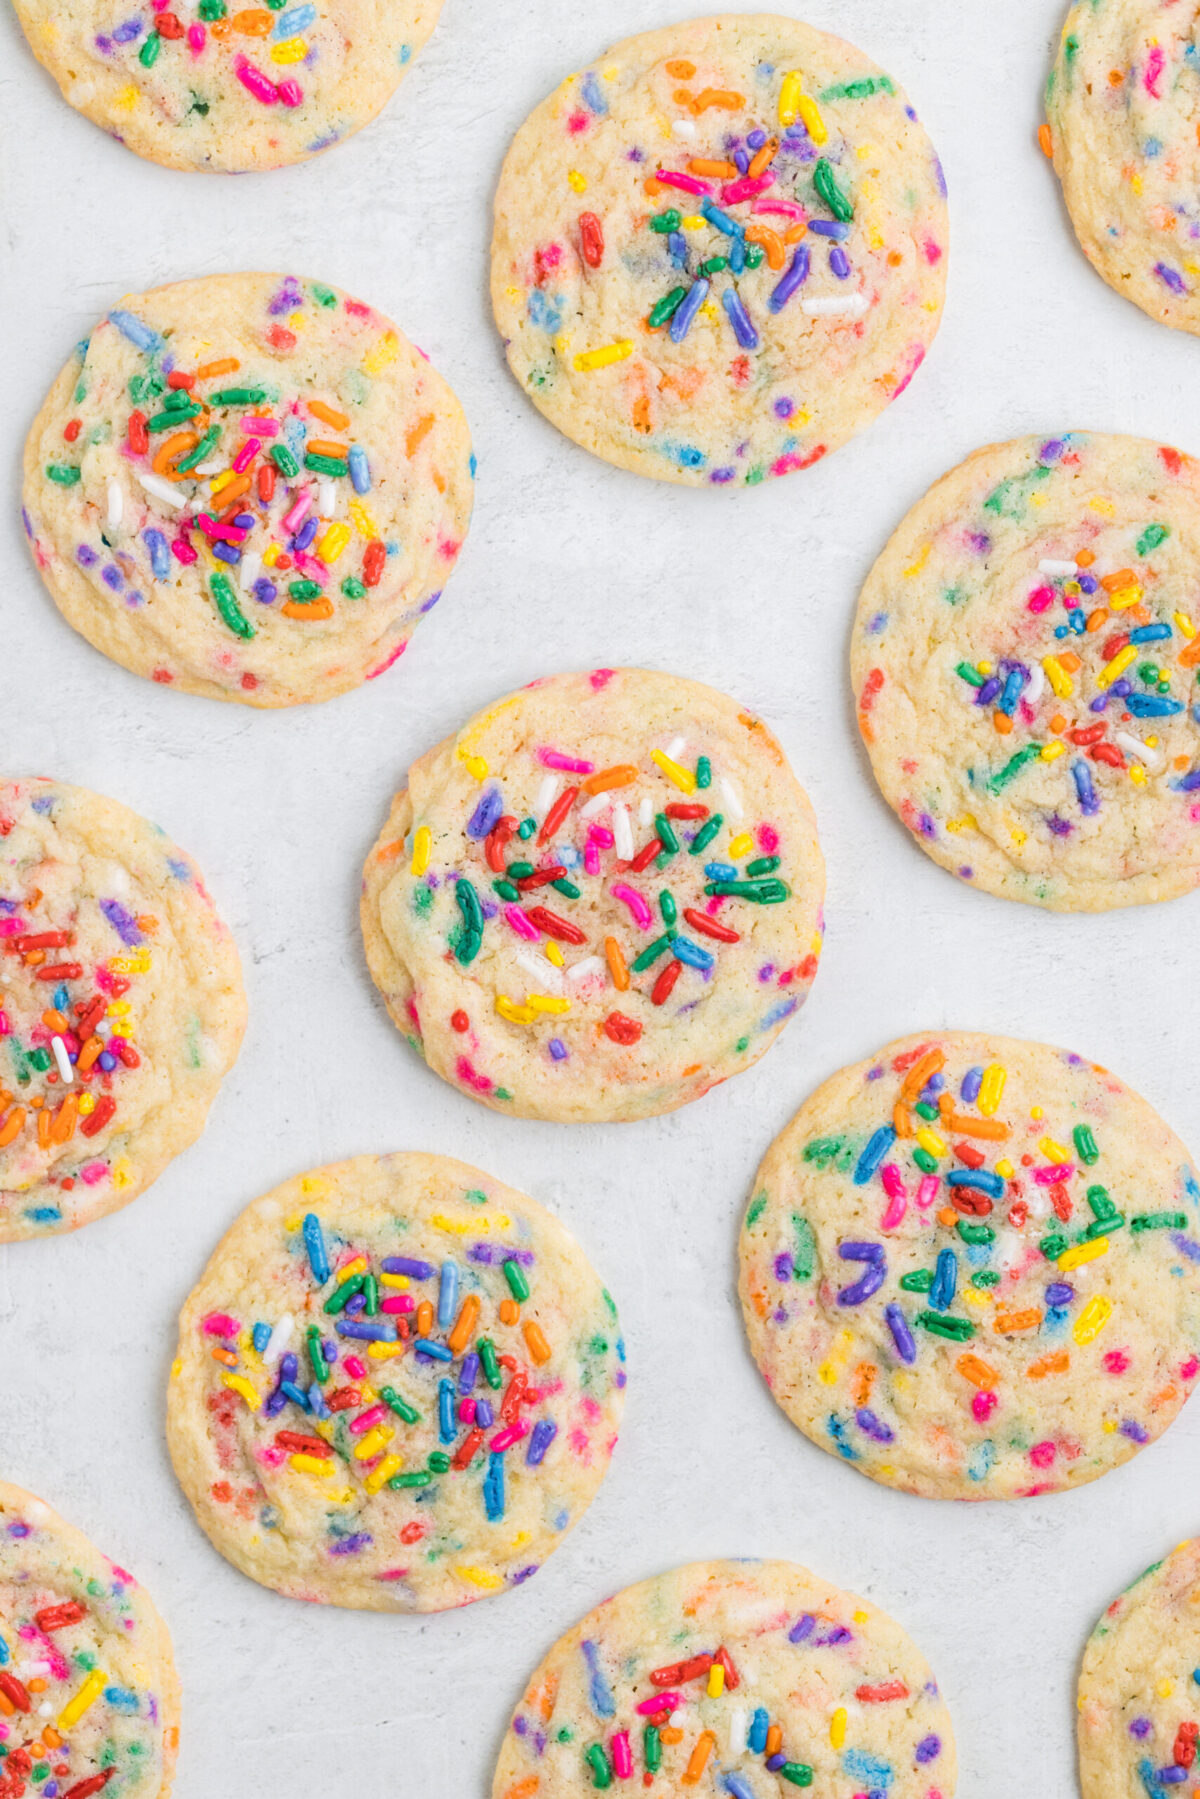 Funfetti cookies laid flat on a white background about 12 cookies.